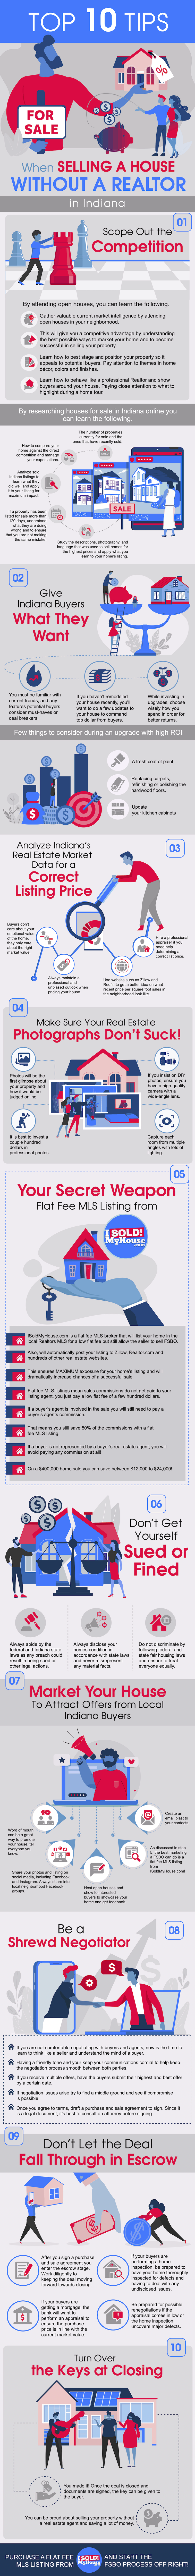 infographic of the 10 steps to sell a house in indiana without an agent